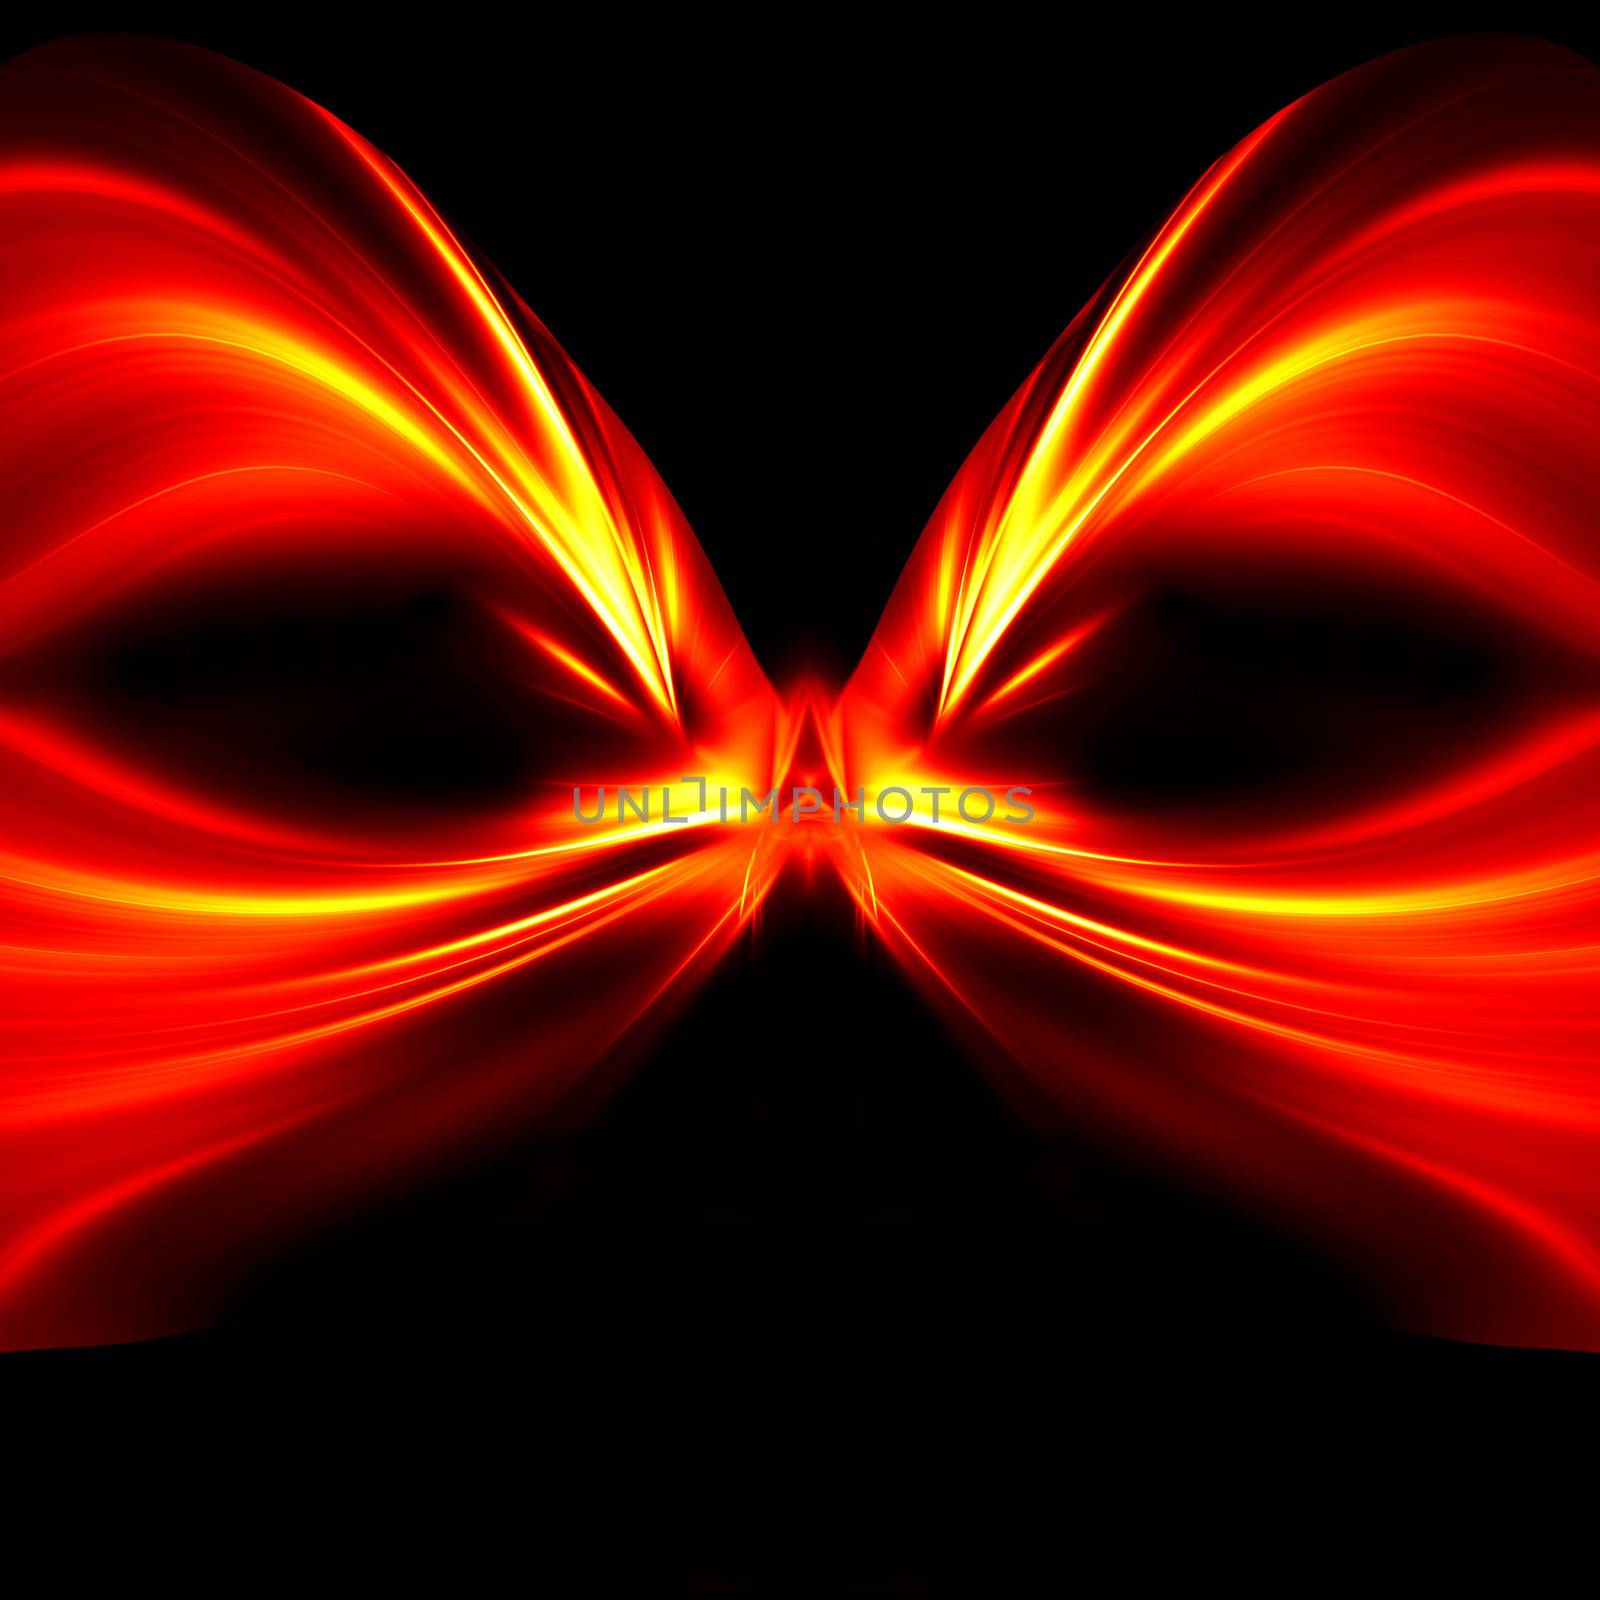 Abstract mask of red and yellow rays on black background. High resolution 3D image